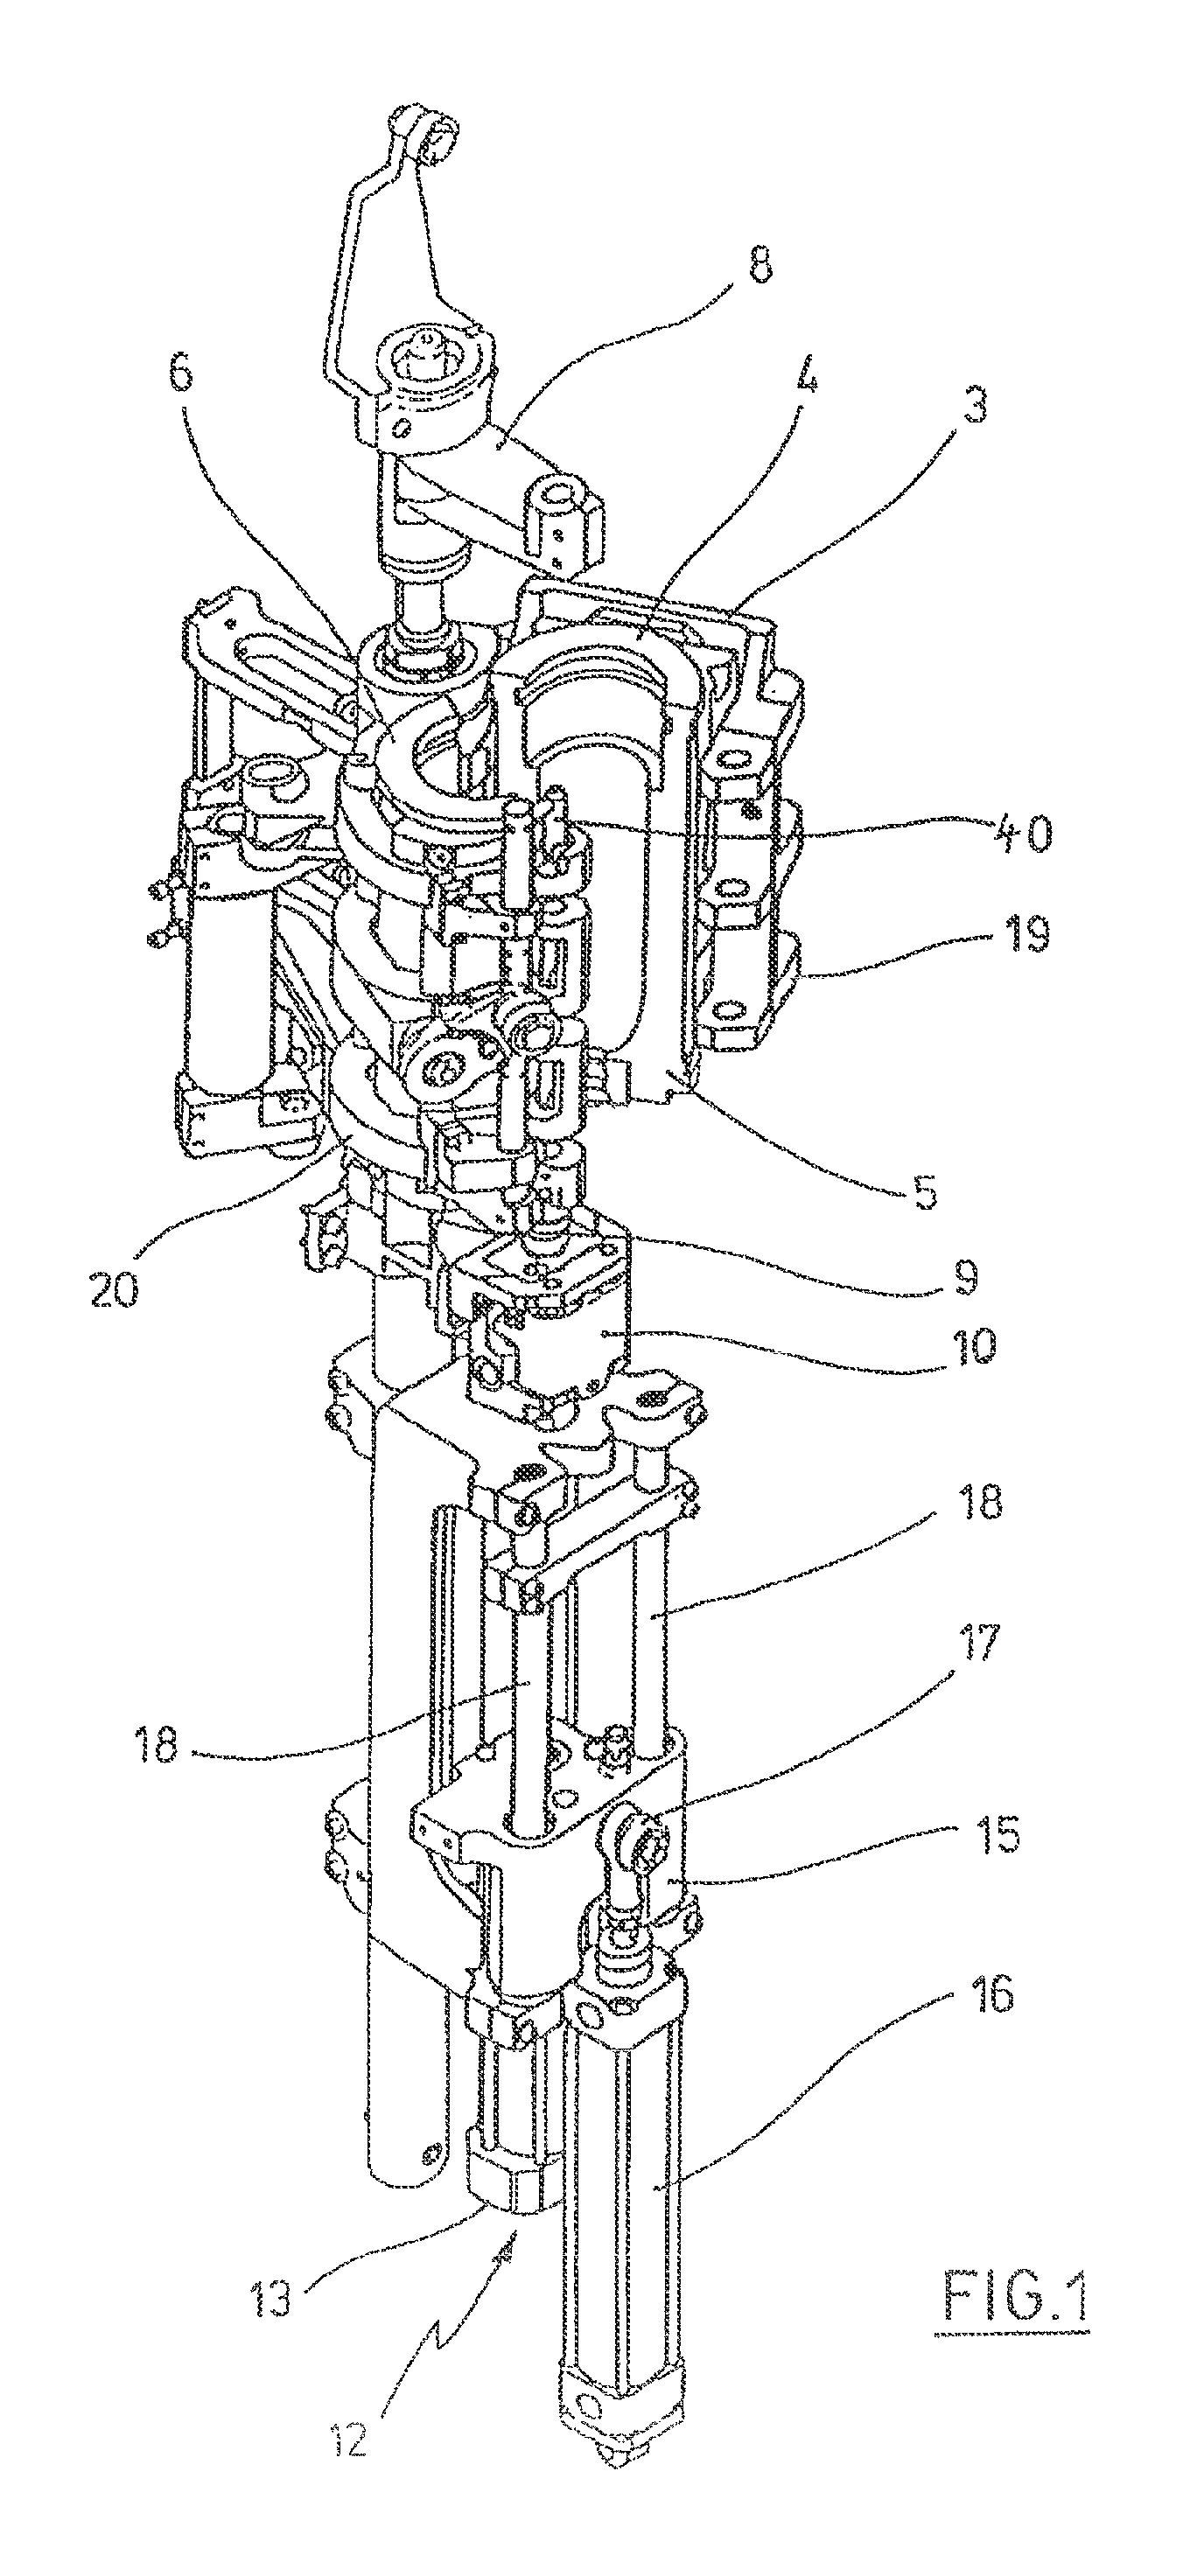 Method and apparatus for blow-molding containers